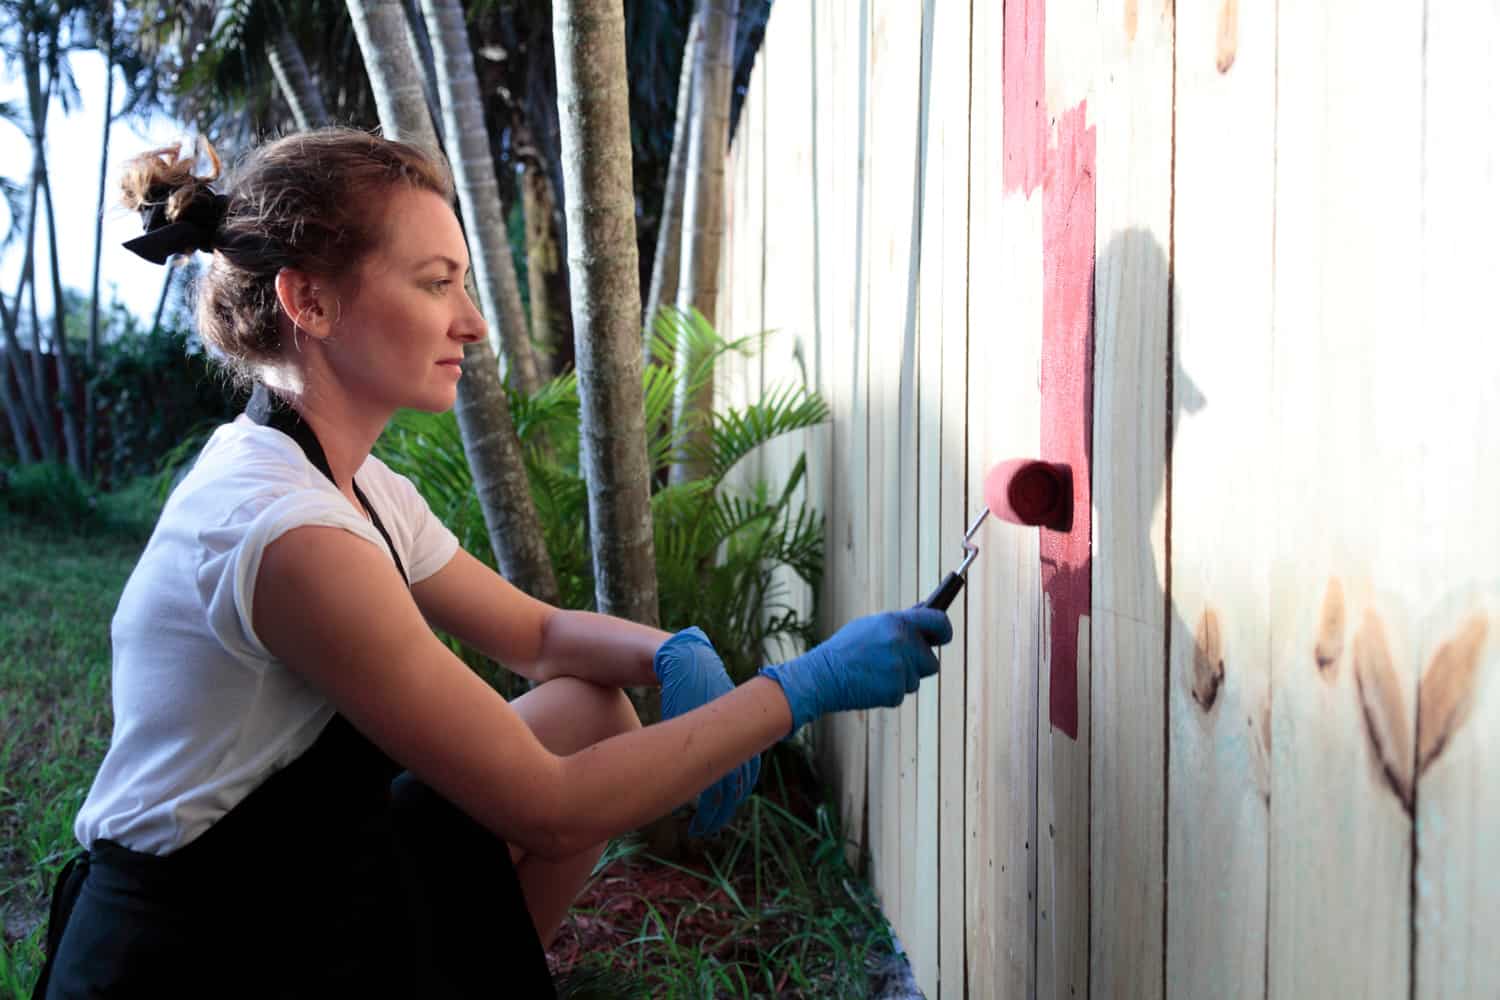 Young woman is painting a fence